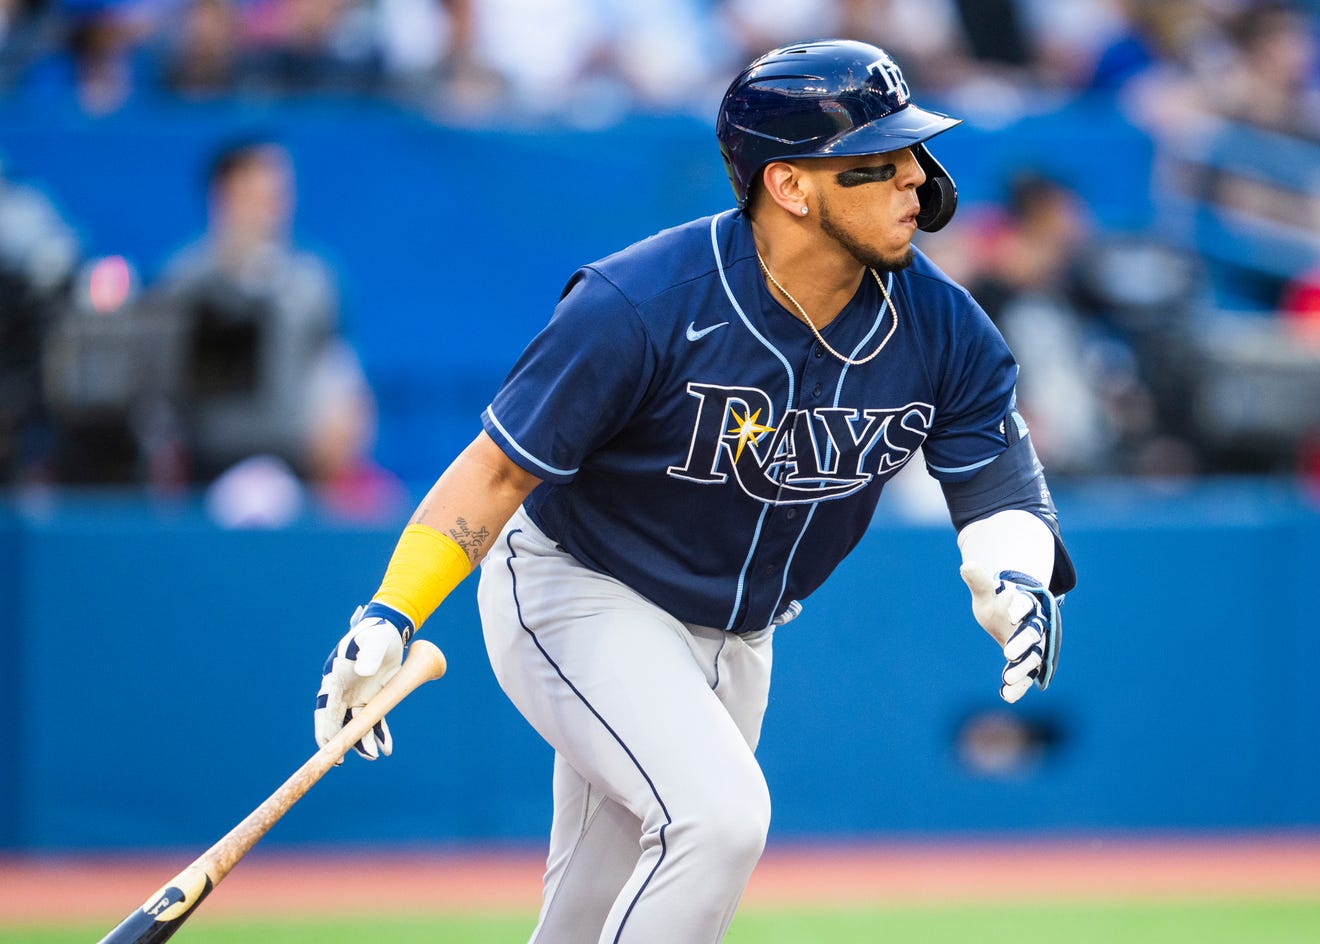 Isaac Paredes has walloped 13 home runs in 43 games with the Tampa Bay Rays this season.